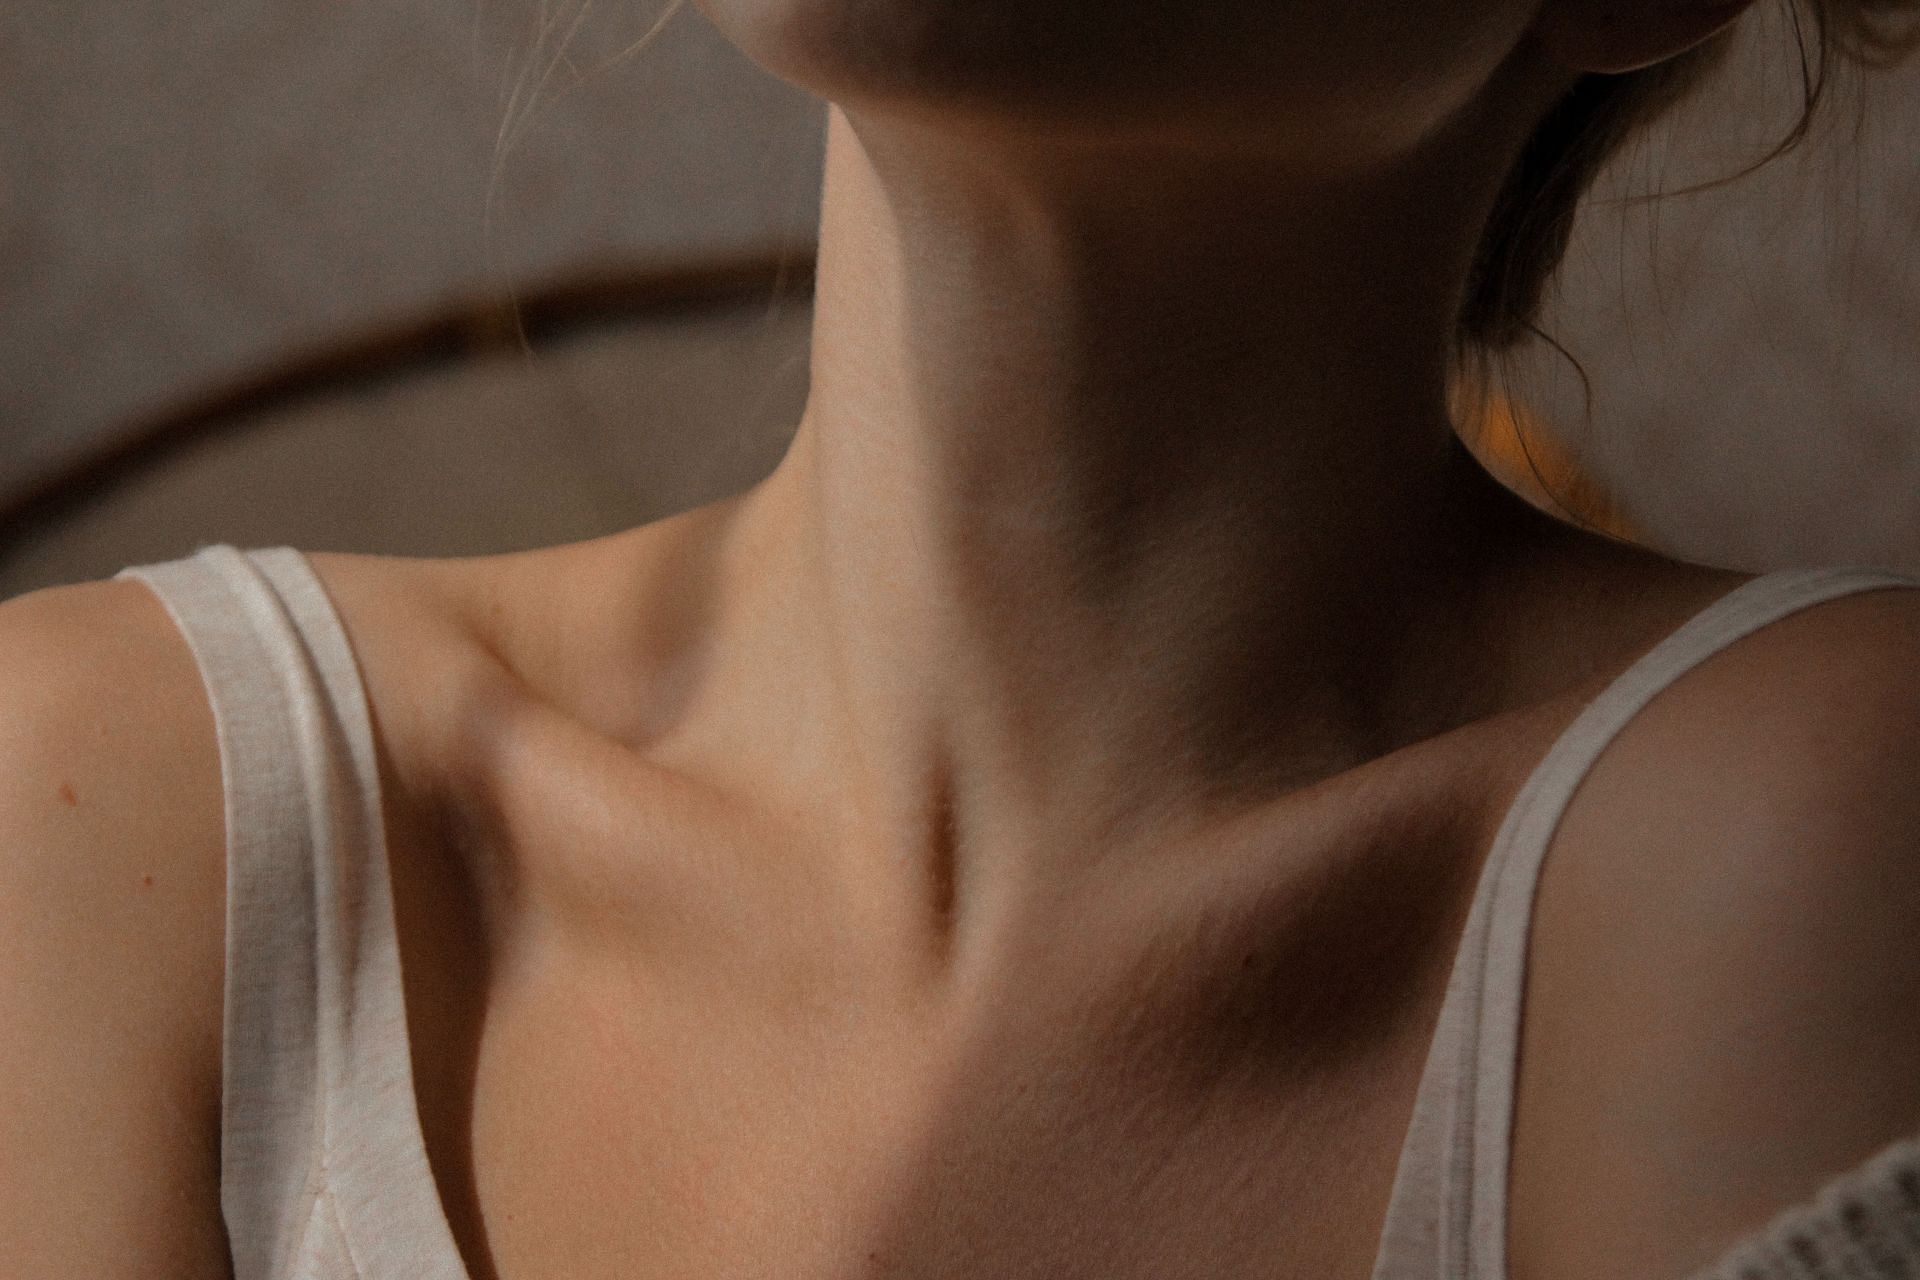 Daily cardio and right diet plan can help you to loose stubborn neck fat. (Image via Unsplash / Emily )